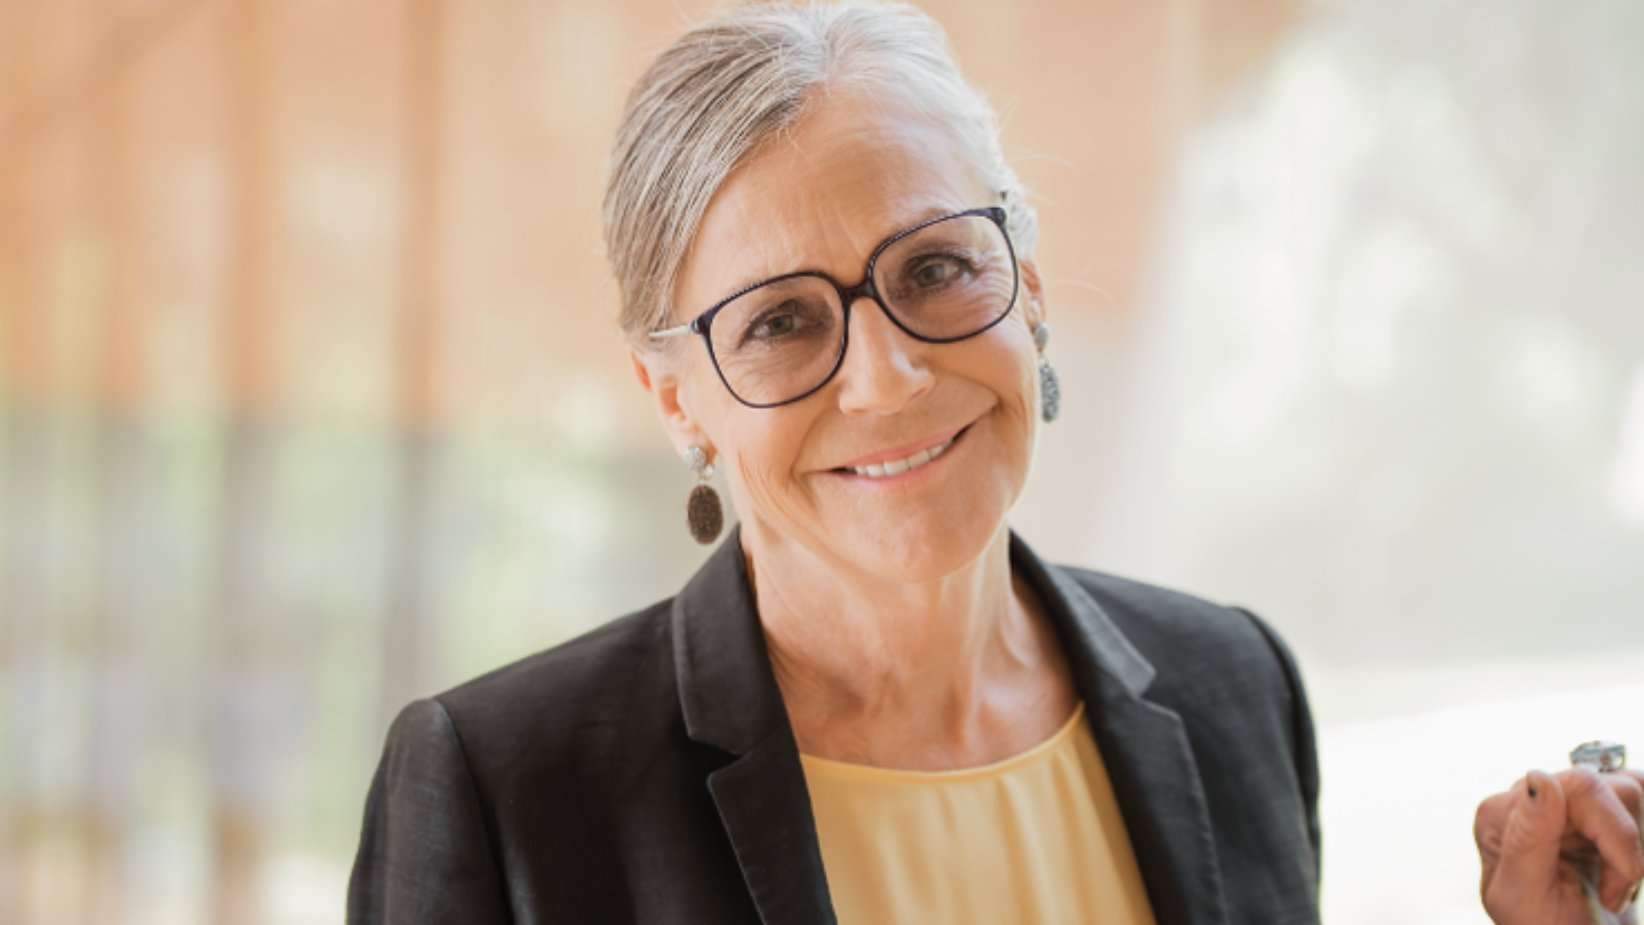 The World's Richest Women 2022 | Alice Walton was the richest woman in the world in 2020 | Photo Courtesy: @ForbesWomen from Twitter